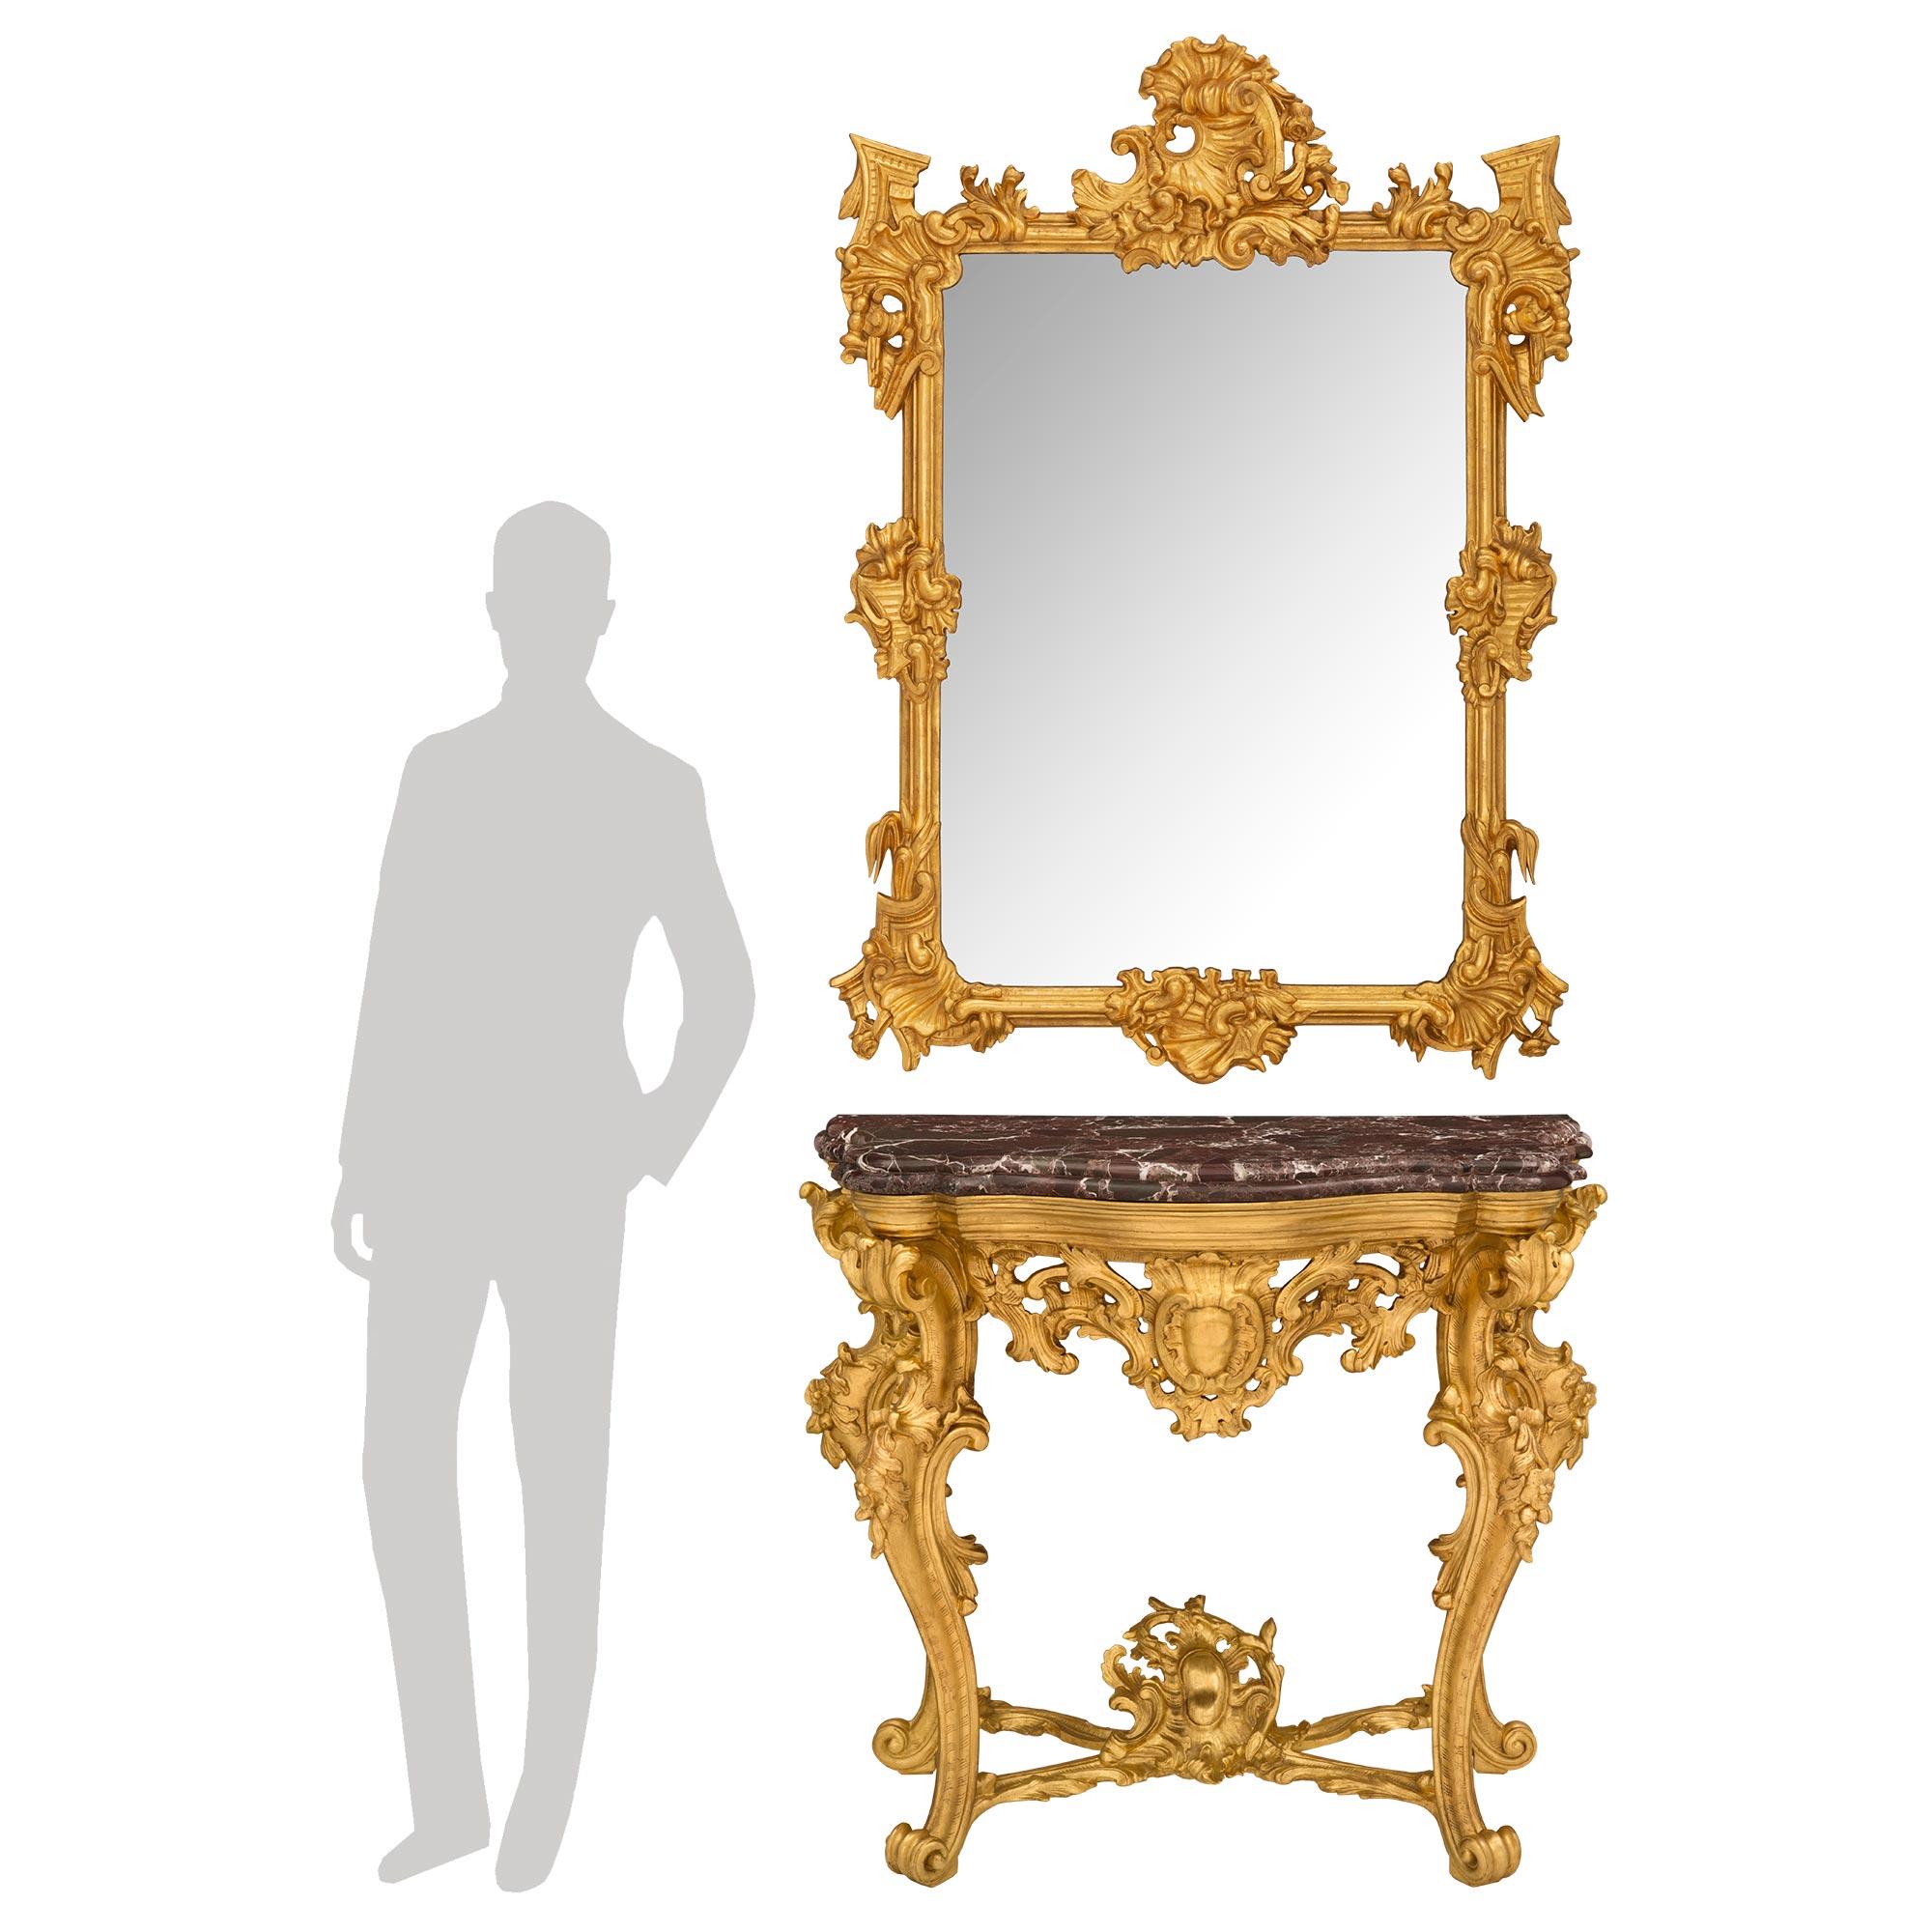 A stunning Italian 19th century Baroque st. giltwood console and matching mirror. The freestanding console is raised by striking cabriole legs with elegant scrolled feet. Each leg is connected by an impressive and most decorative foliate stretcher